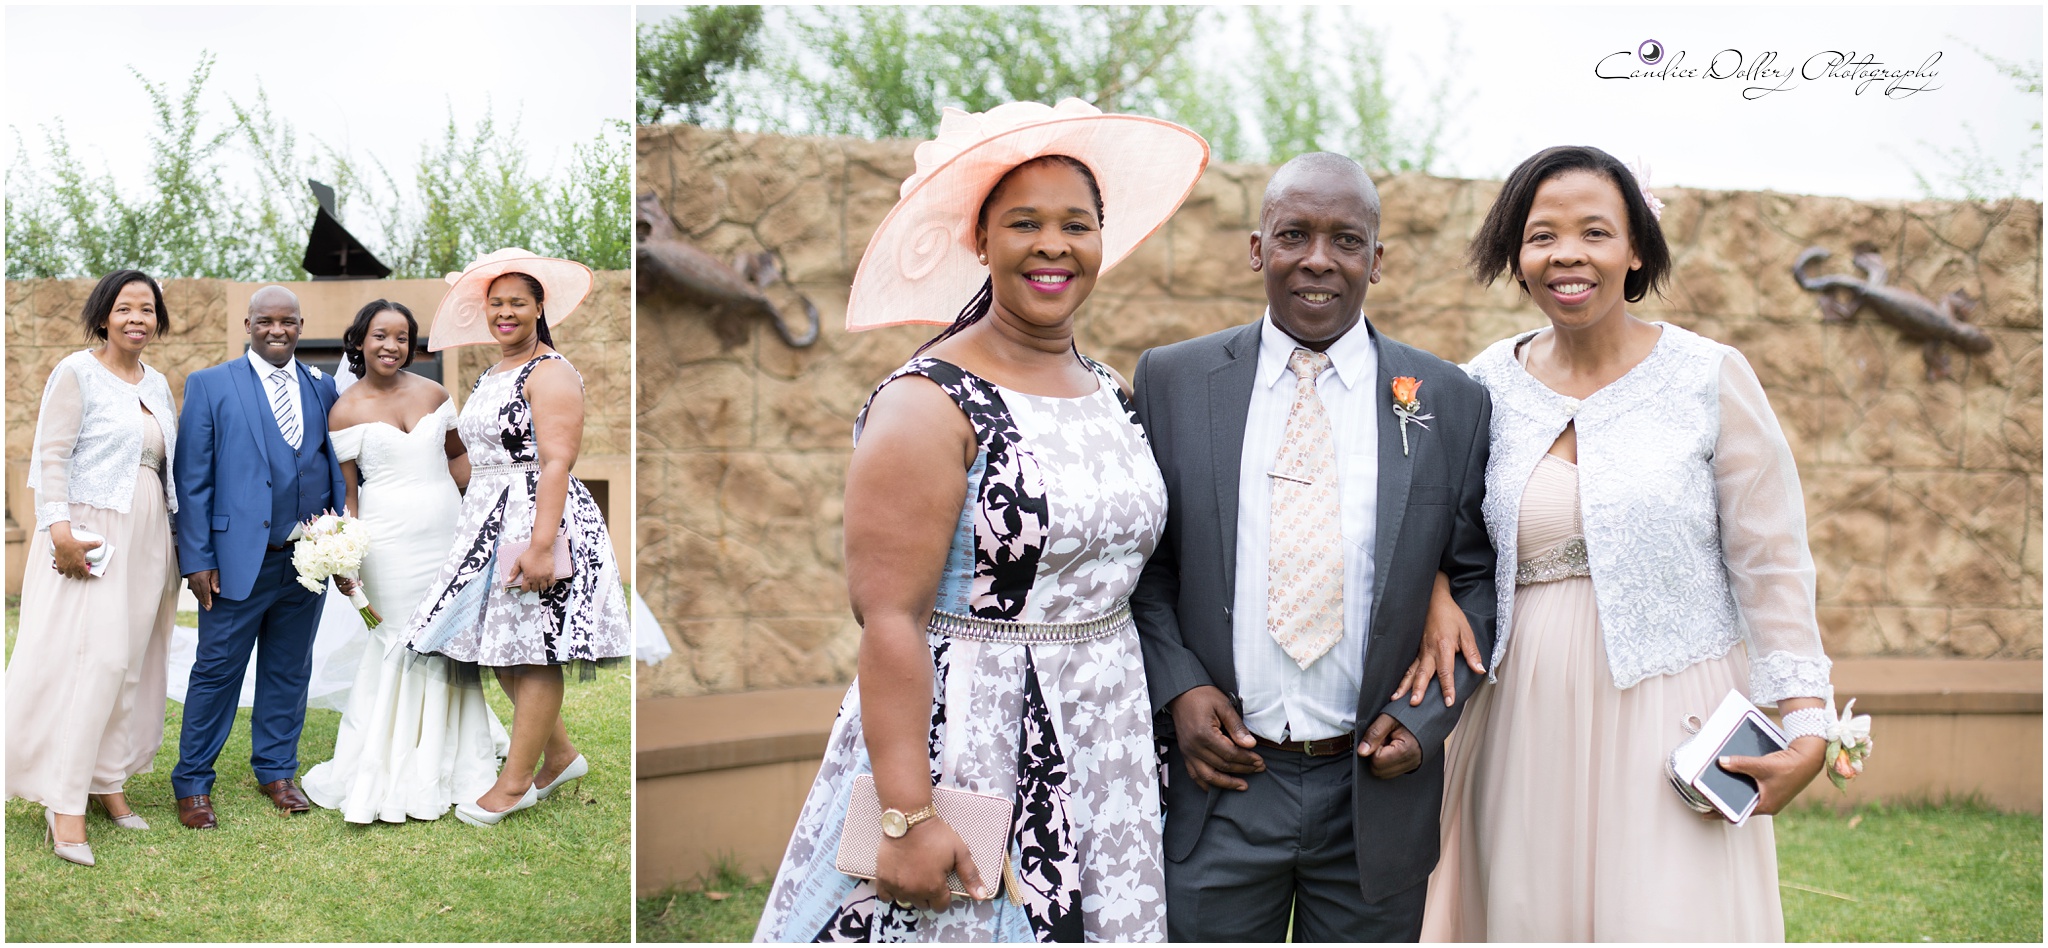 Thembi & Sabelo's Wedding - Candice Dollery Photography_8306